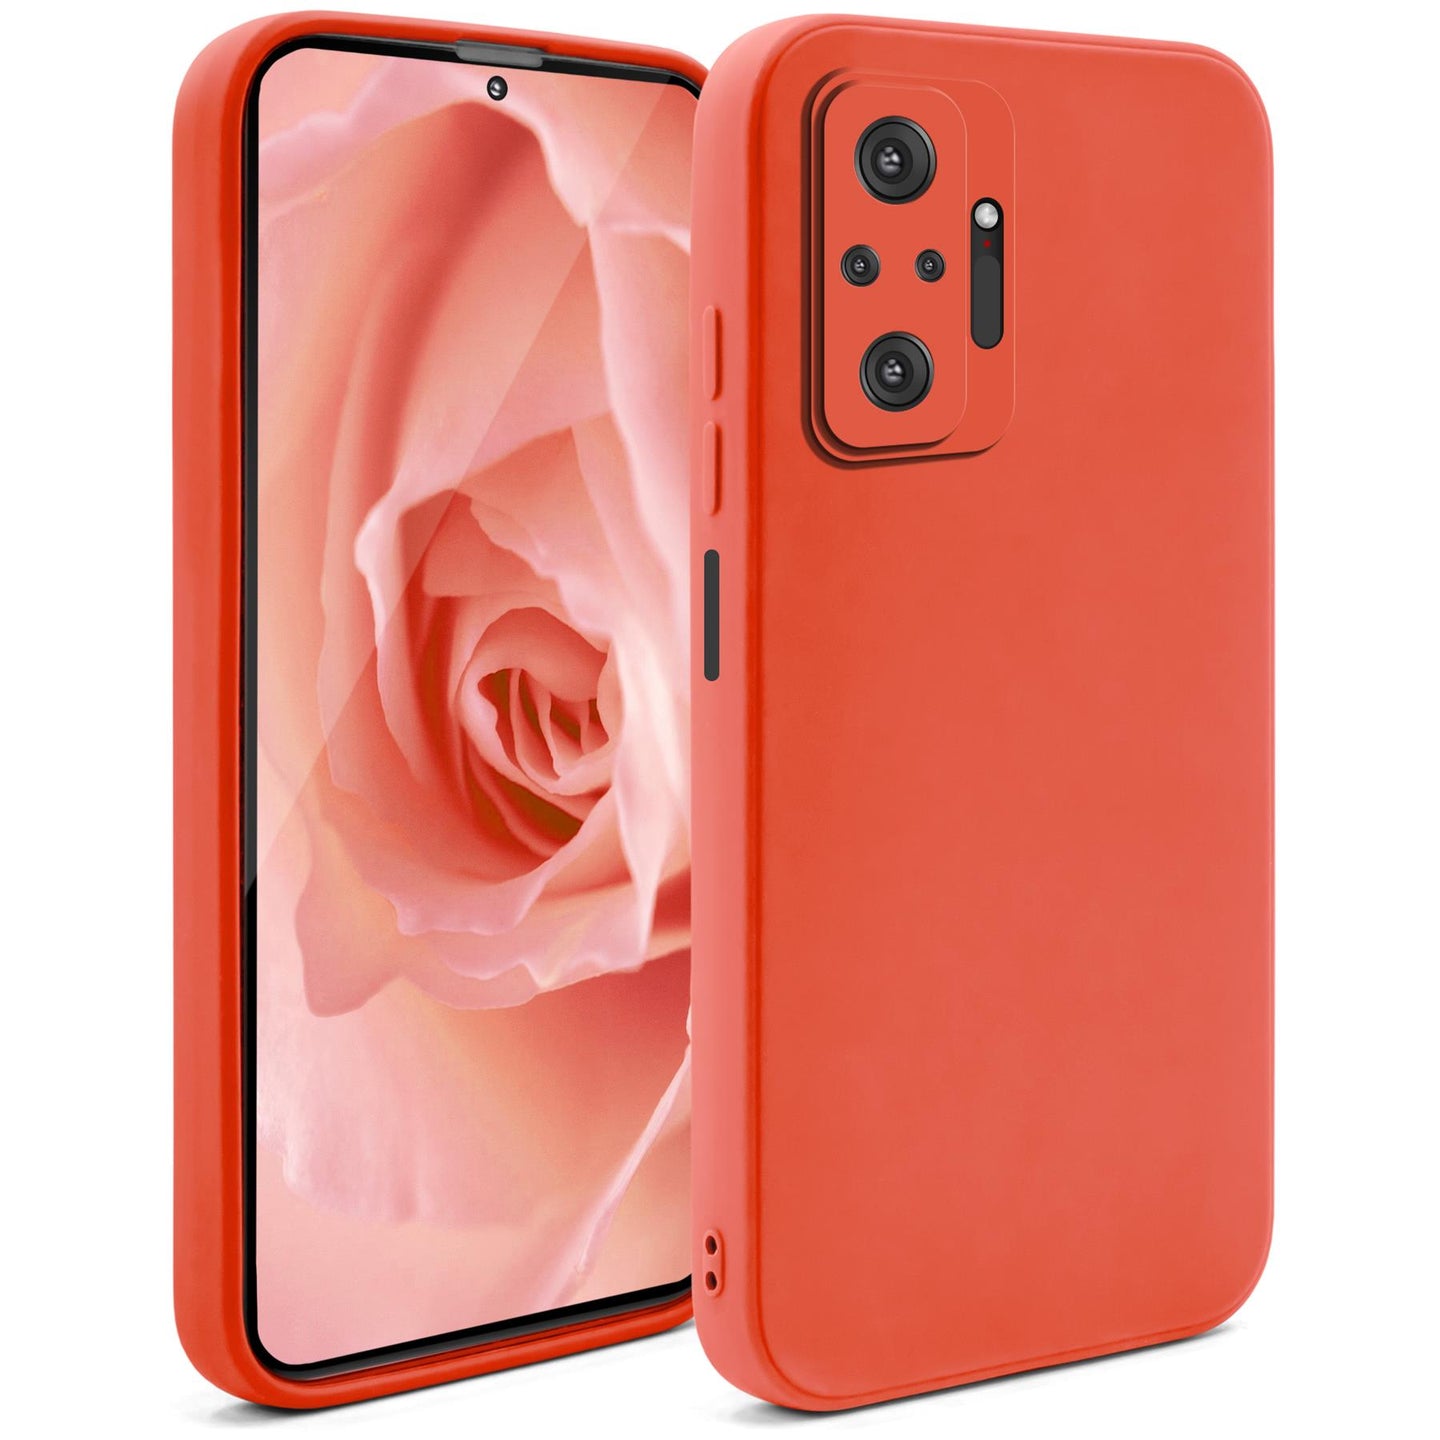 Moozy Minimalist Series Silicone Case for Xiaomi Redmi Note 10 Pro and Note 10 Pro Max, Red - Matte Finish Lightweight Mobile Phone Case Slim Soft Protective TPU Cover with Matte Surface